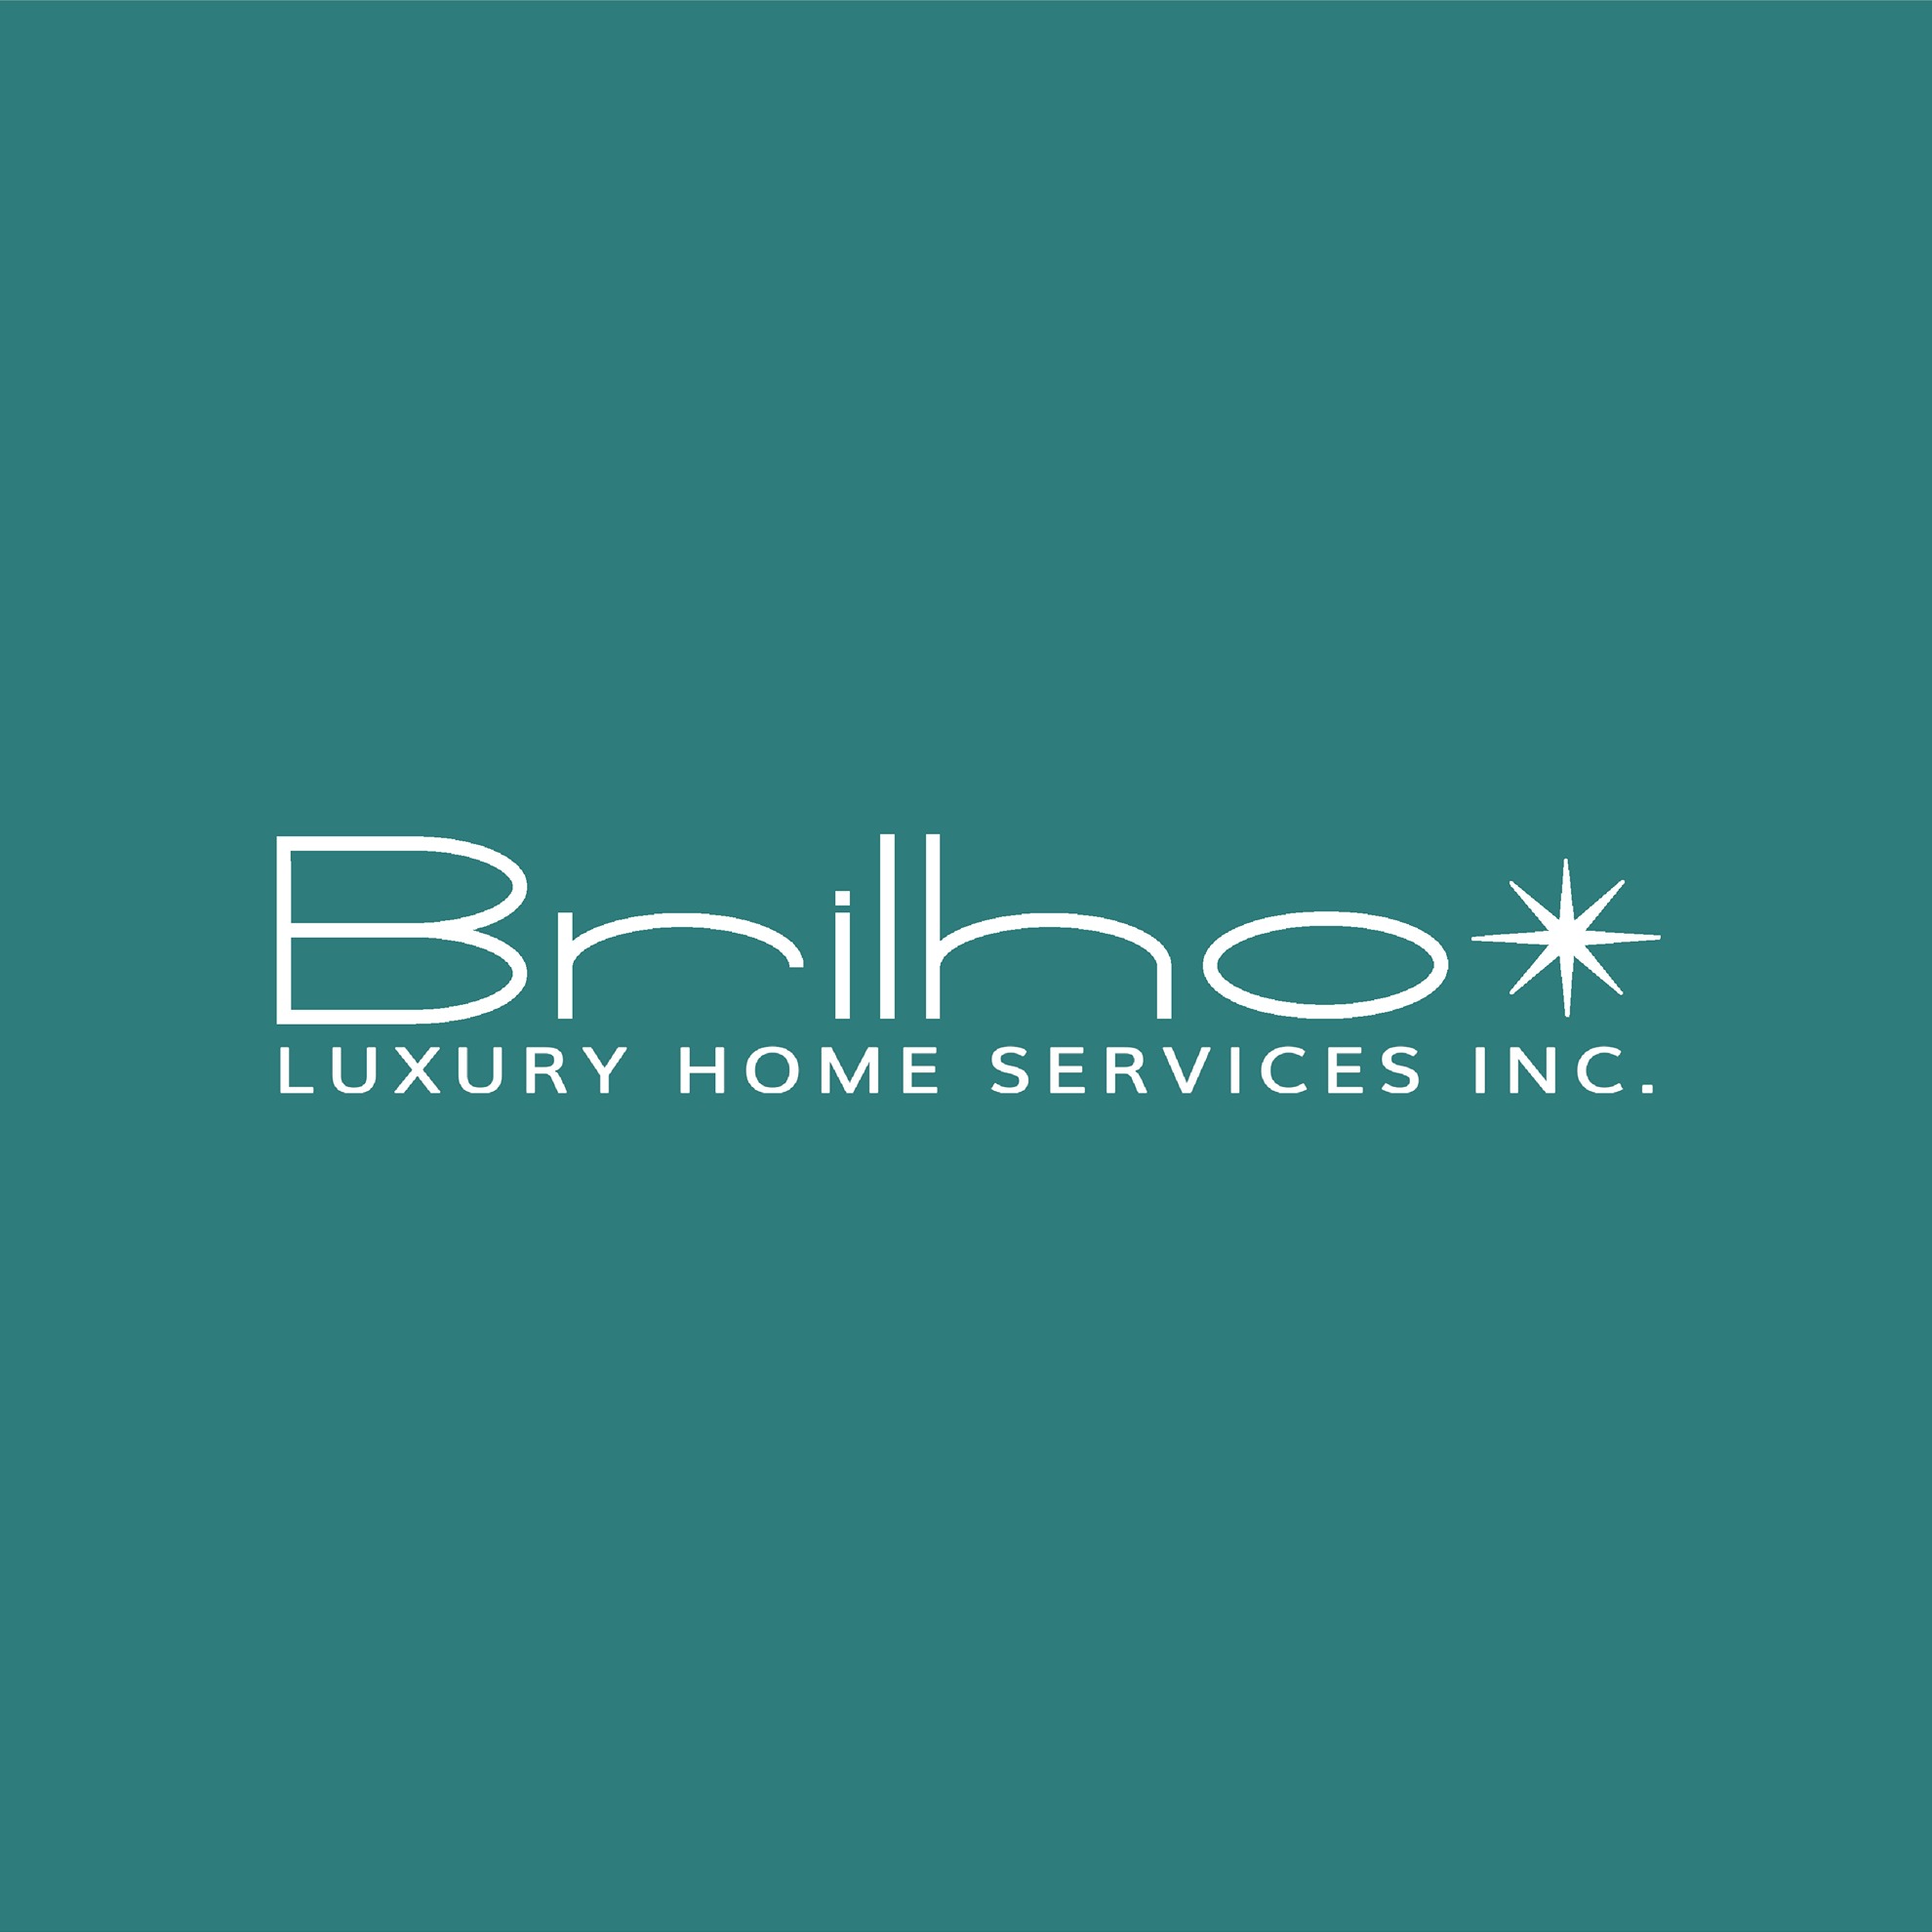 Cleaning Company Services in Toronto - Brilho Luxury Home Services Inc